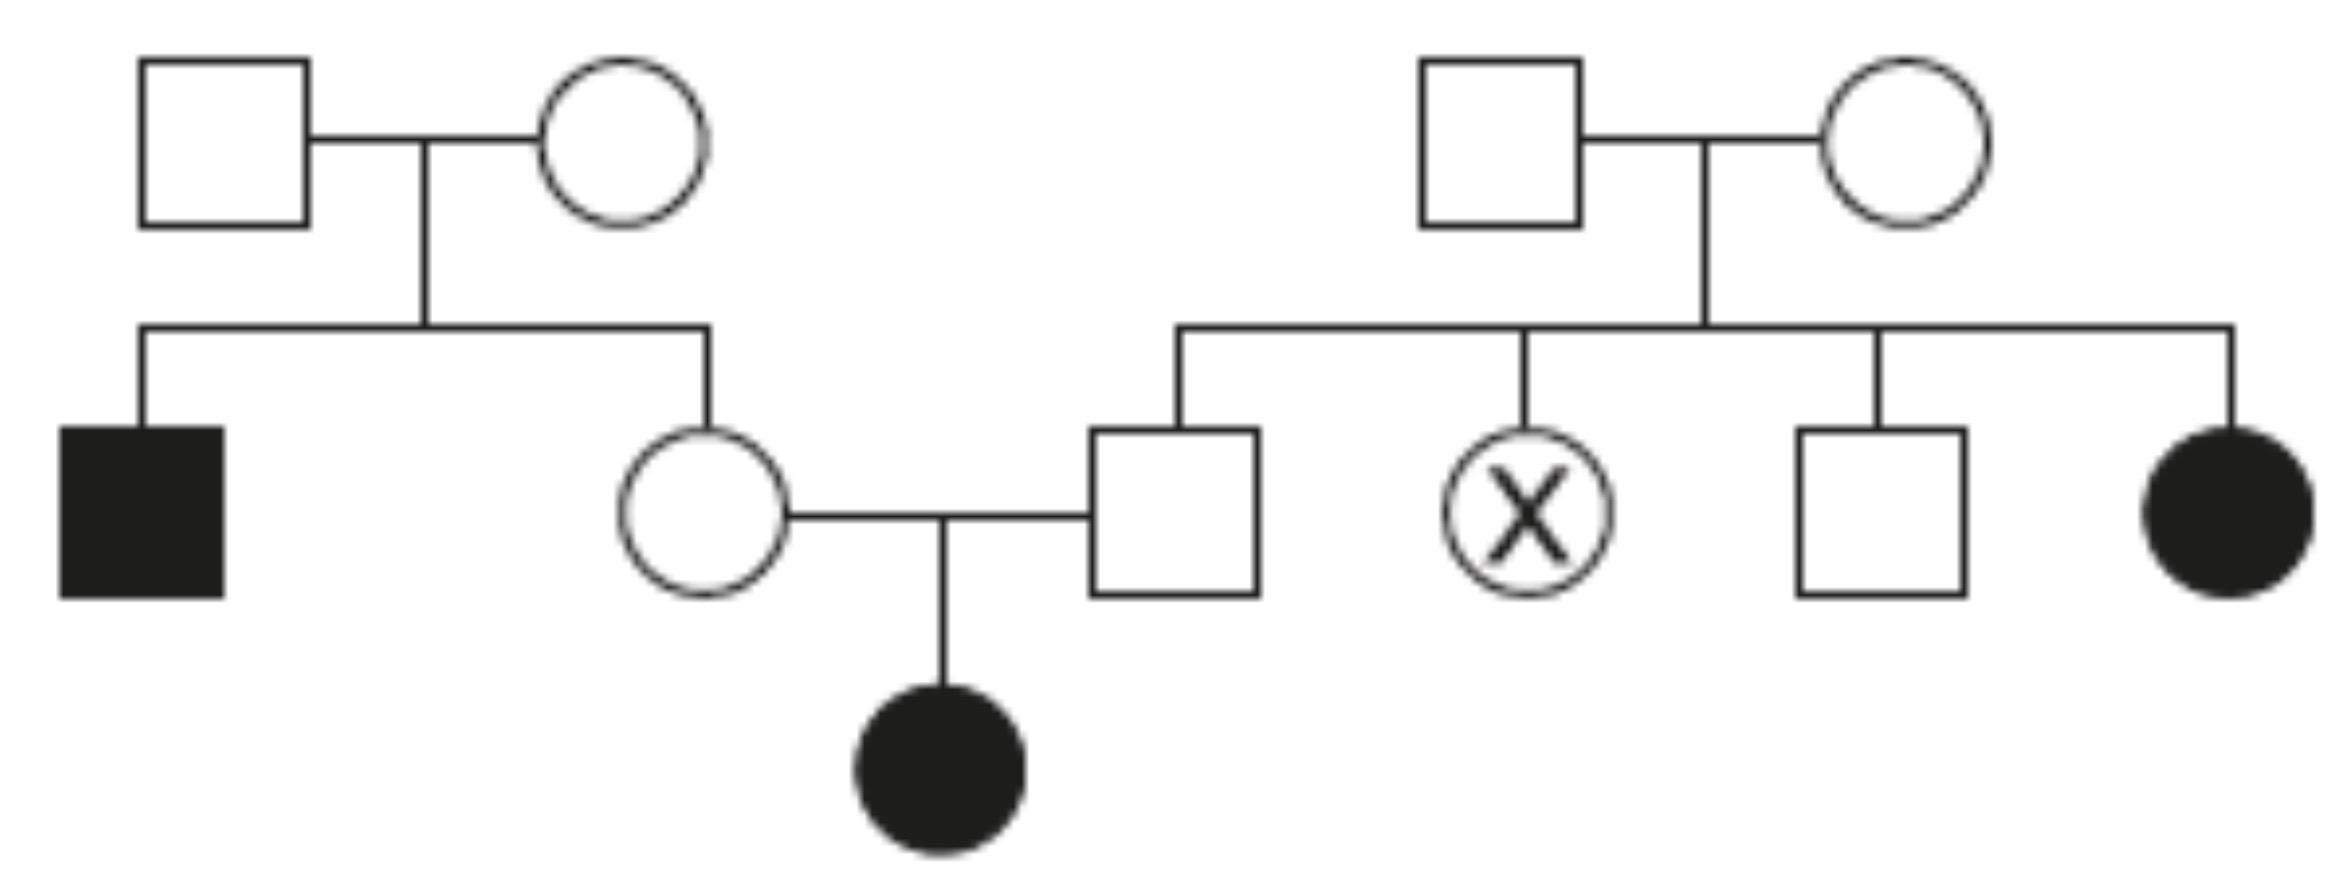 <p>The diagram shows a pedigree of cystic fibrosis, in which the black colour indicates the presence of cystic fibrosis.</p><p>What is the probability that the individual labelled X is a carrier of cystic fibrosis?</p>